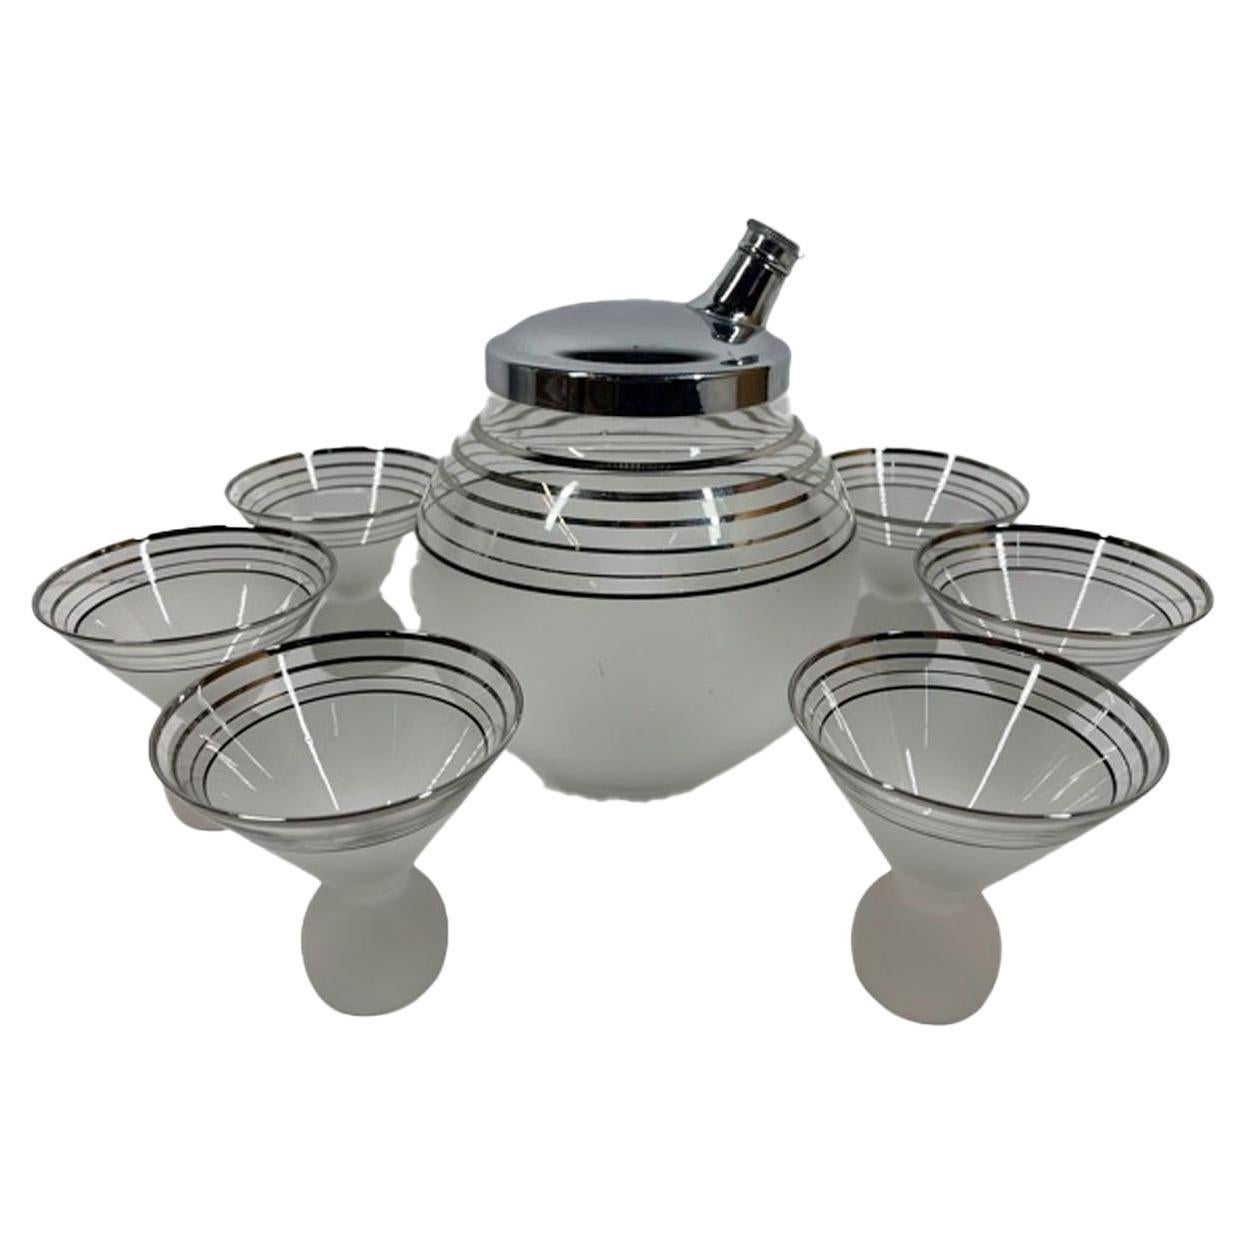 Art Deco Ball Form Cocktail Shaker with Six Ball-Footed Martini Glasses